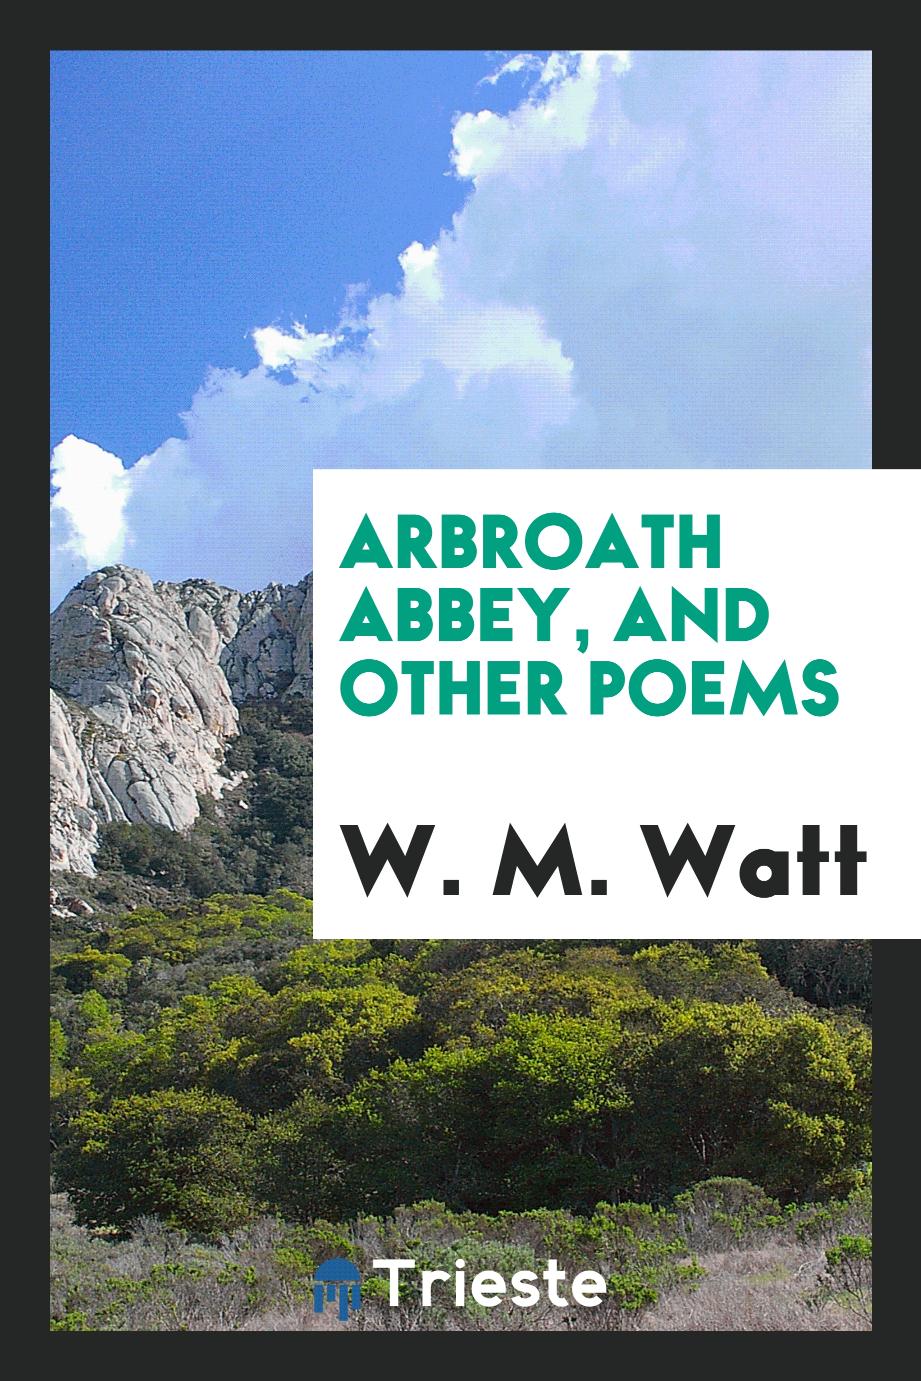 Arbroath Abbey, and other poems